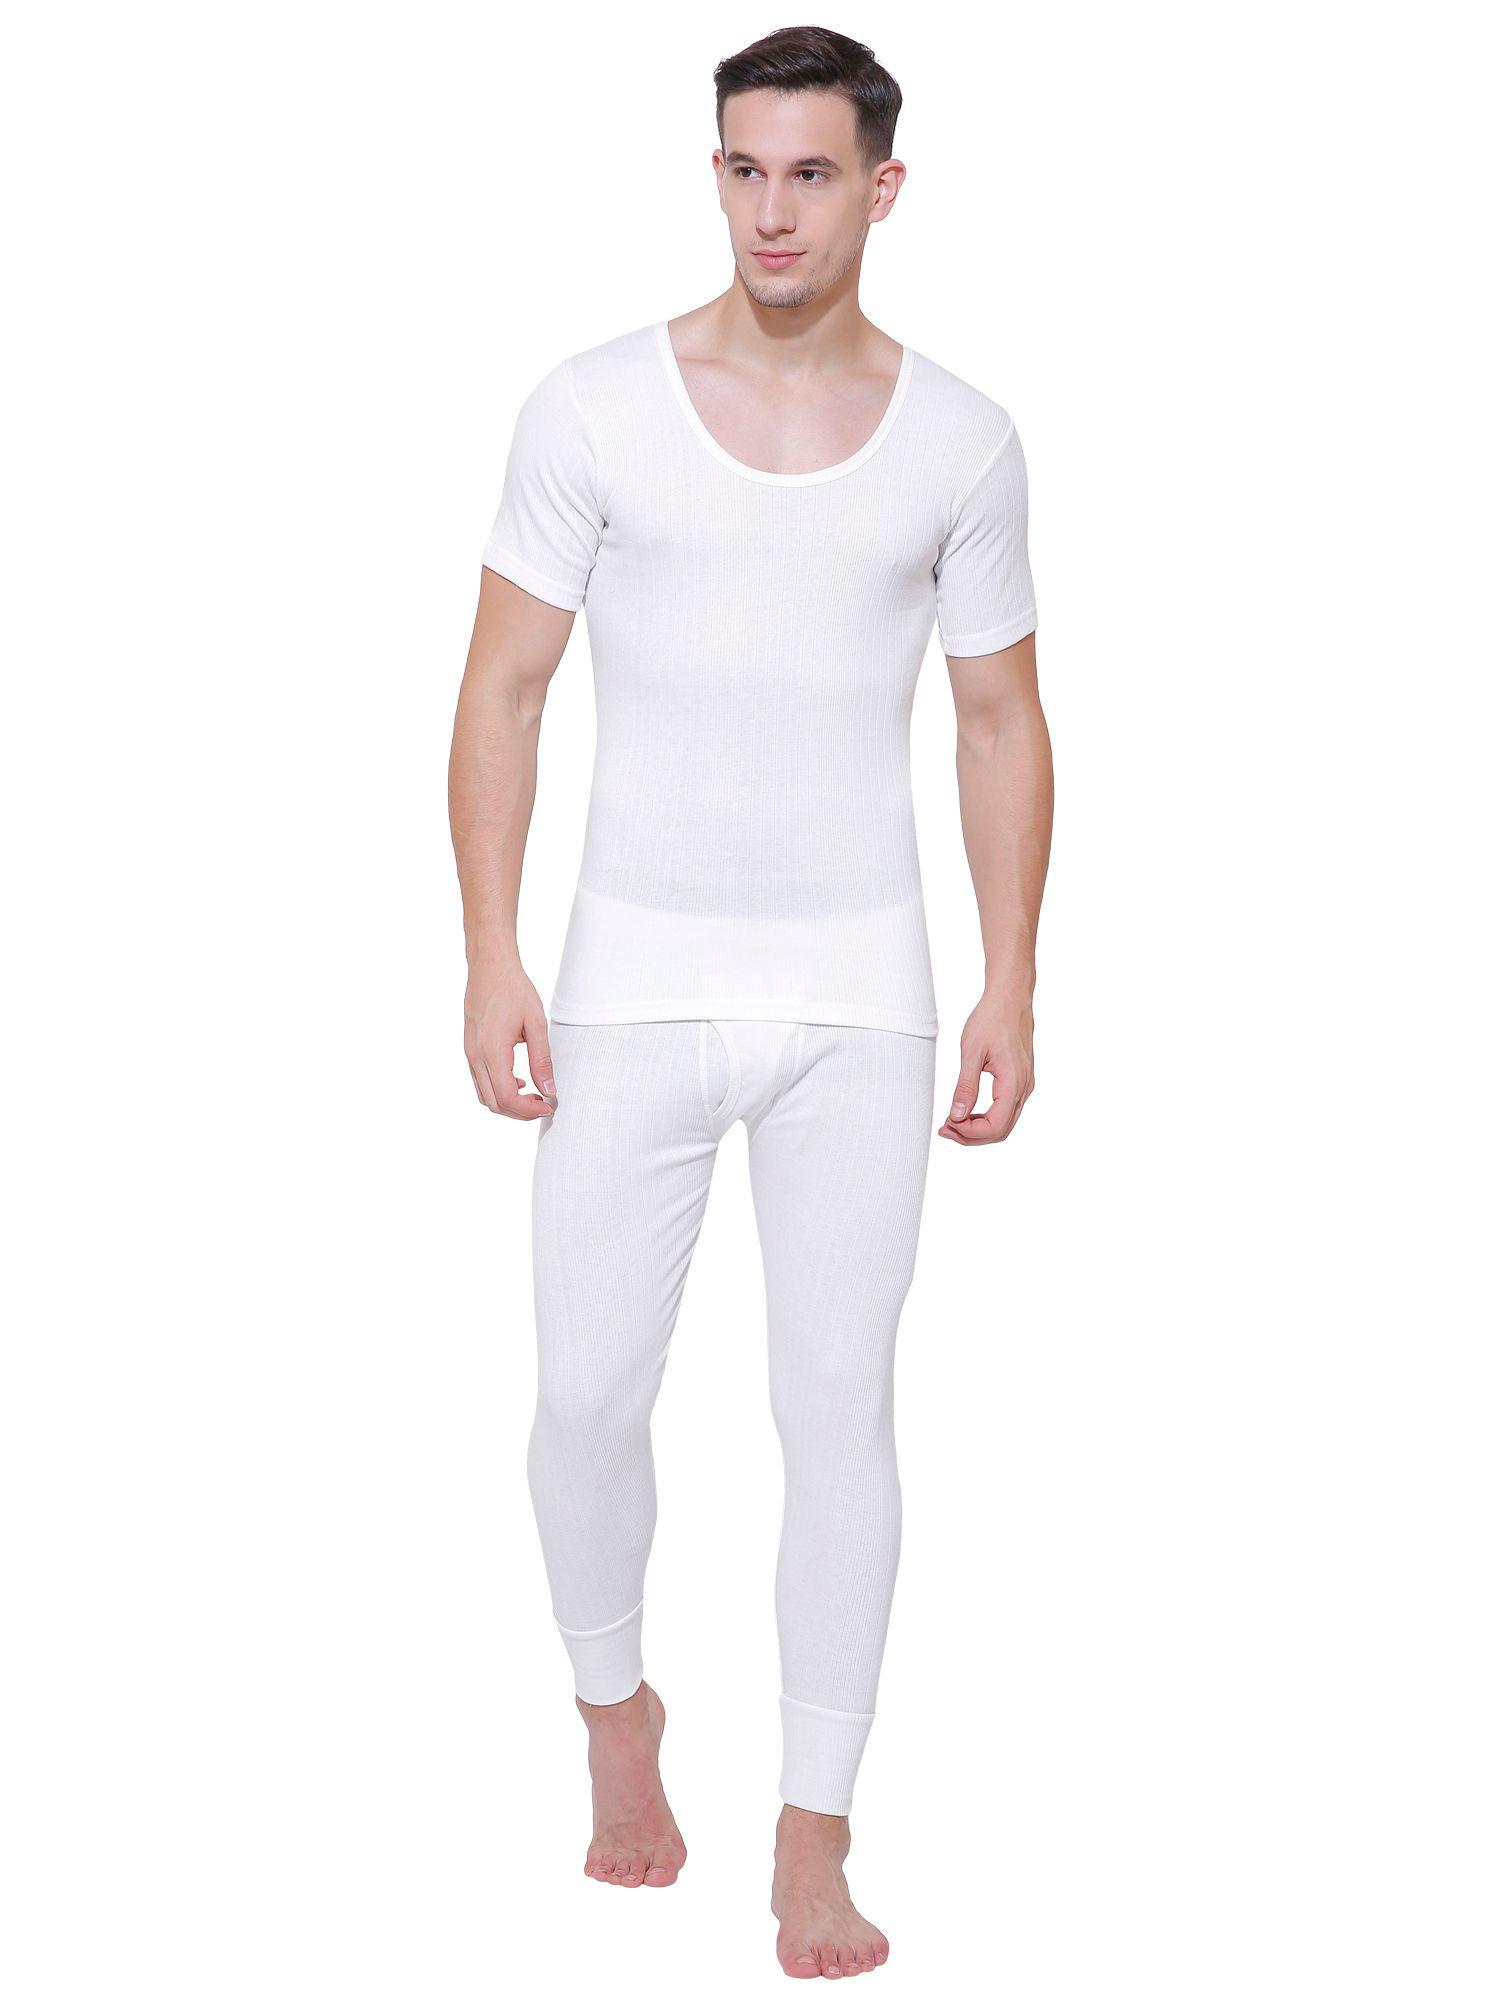 white-solid-men-thermal-top-white